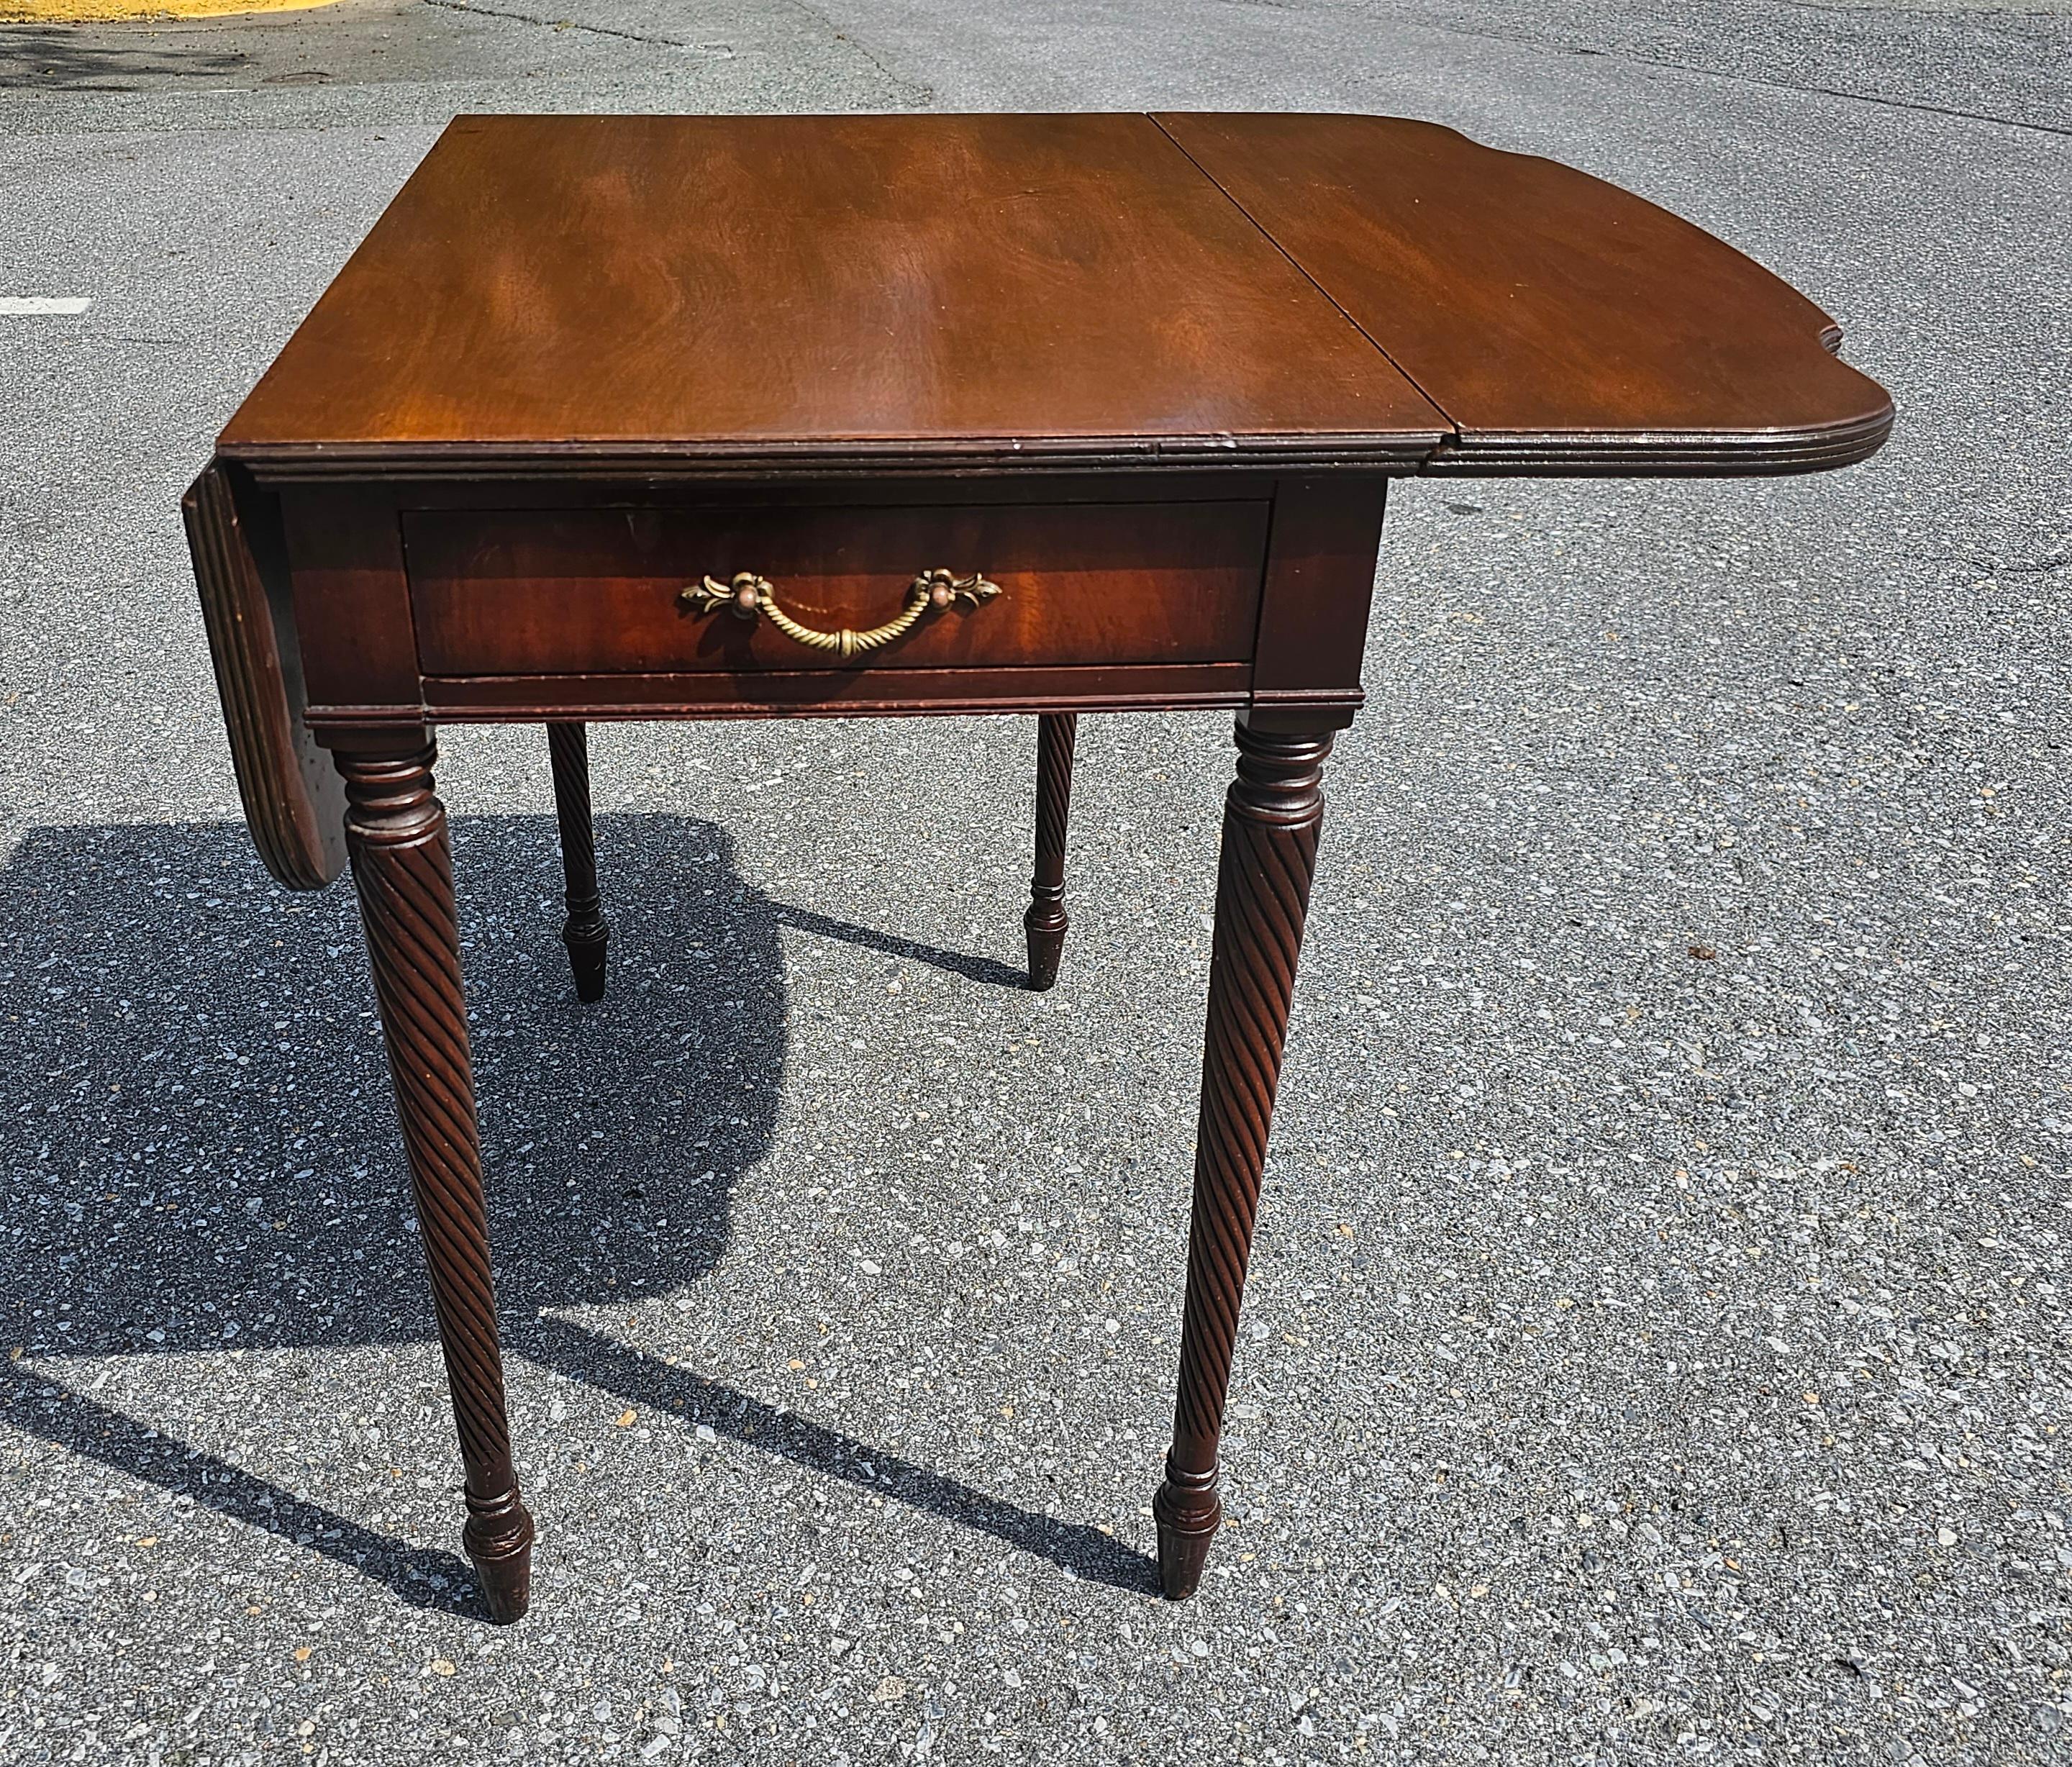 Varnished Early 20th C. Imperial Grand Rapids Mid Century Mahogany Pembroke Table For Sale